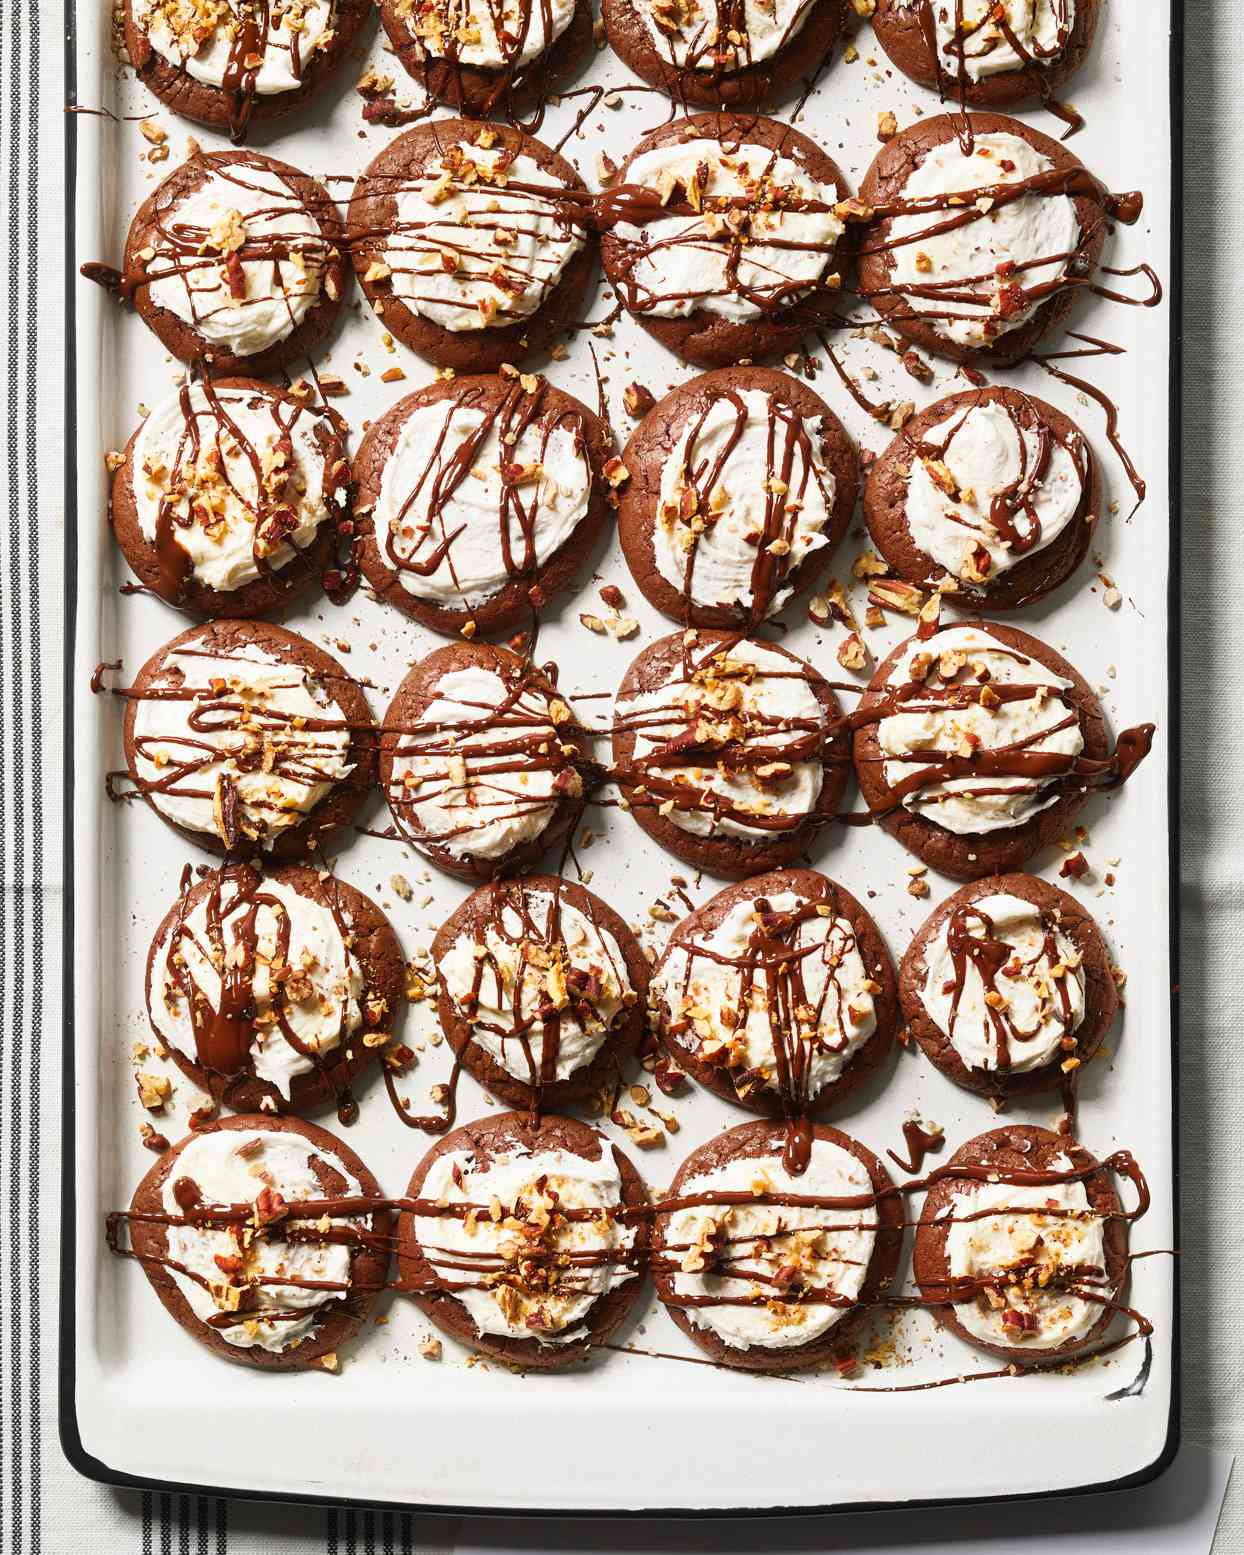 Mississippi Mud chocolate cookies topped with marshmallows and chocolate drizzle